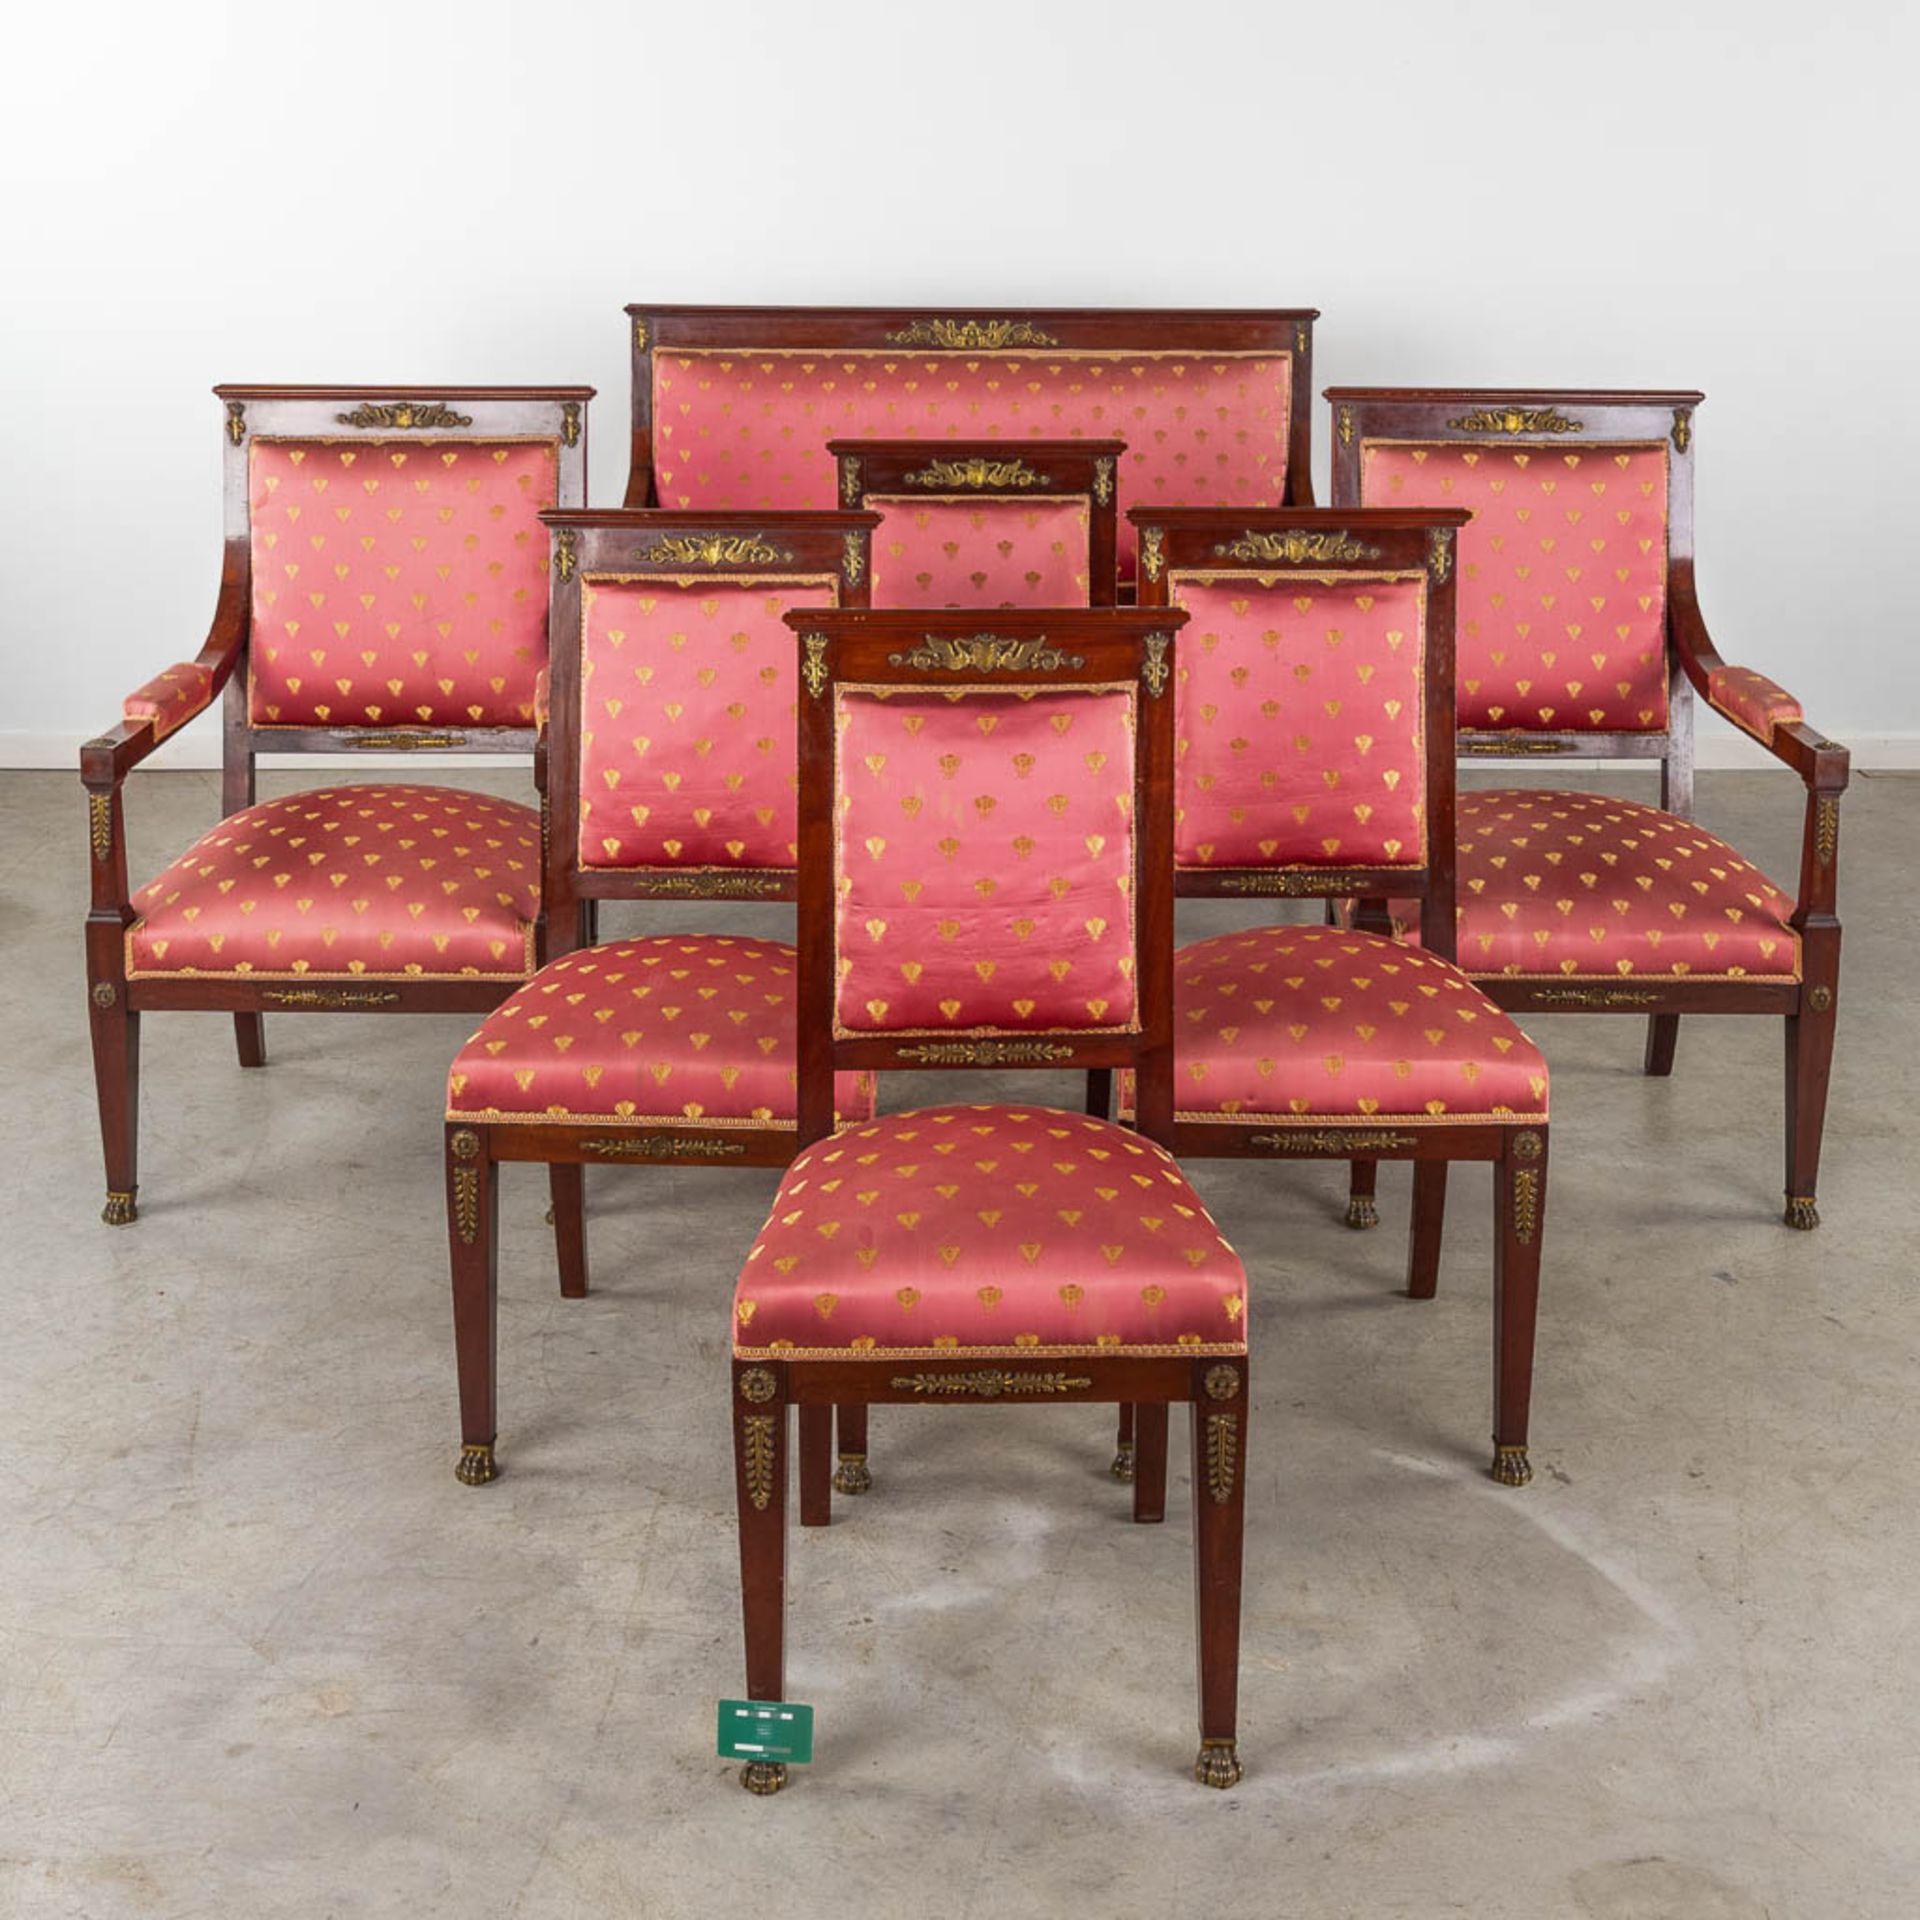 A fine 7-piece salon suite, Empire style, mahogany mounted with bronze. (D:60 x W:130 x H:100 cm) - Image 2 of 25